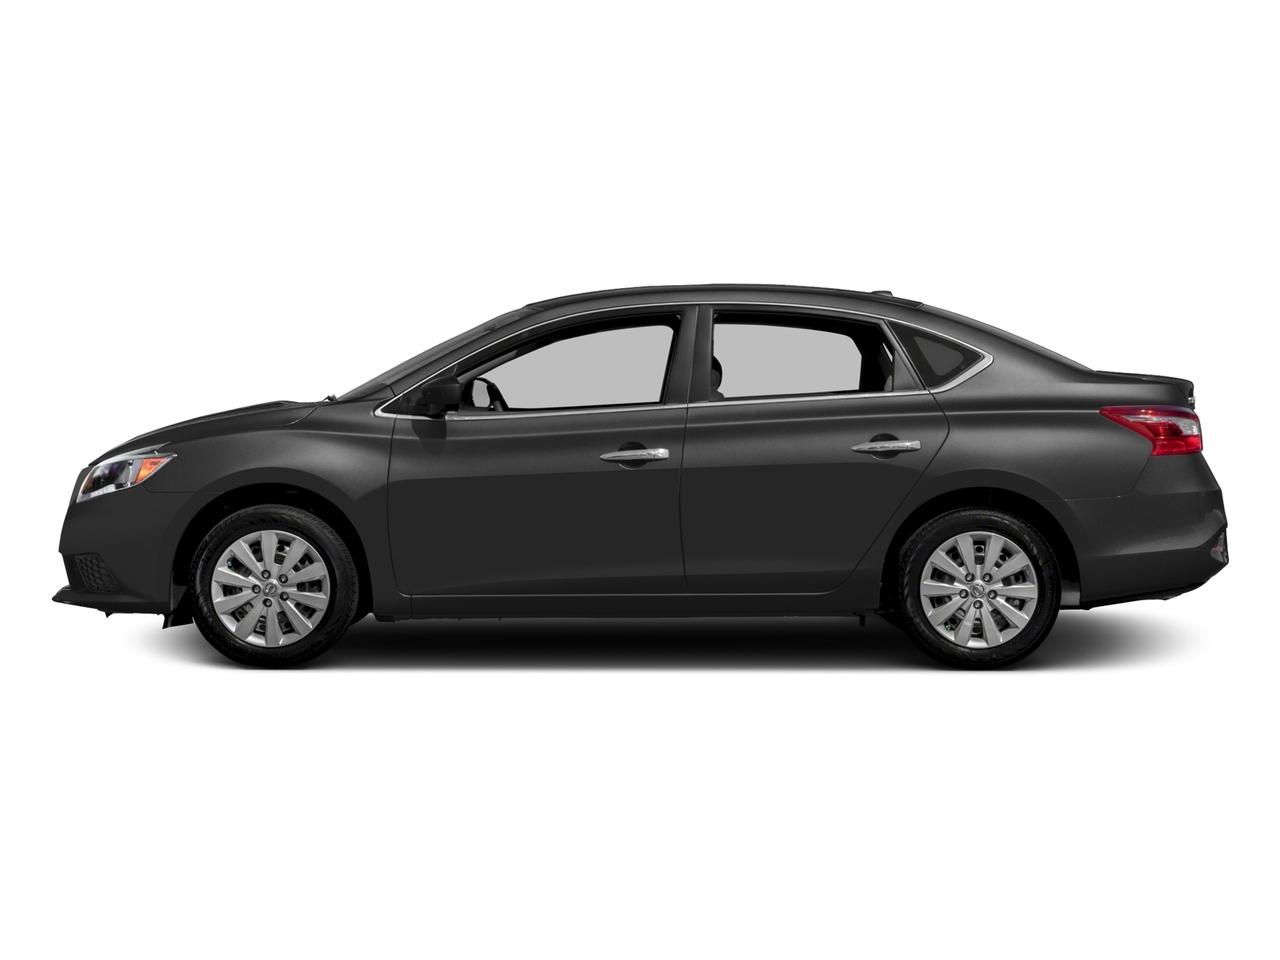 Used 2017 Nissan Sentra S with VIN 3N1AB7AP9HY384256 for sale in Pascagoula, MS